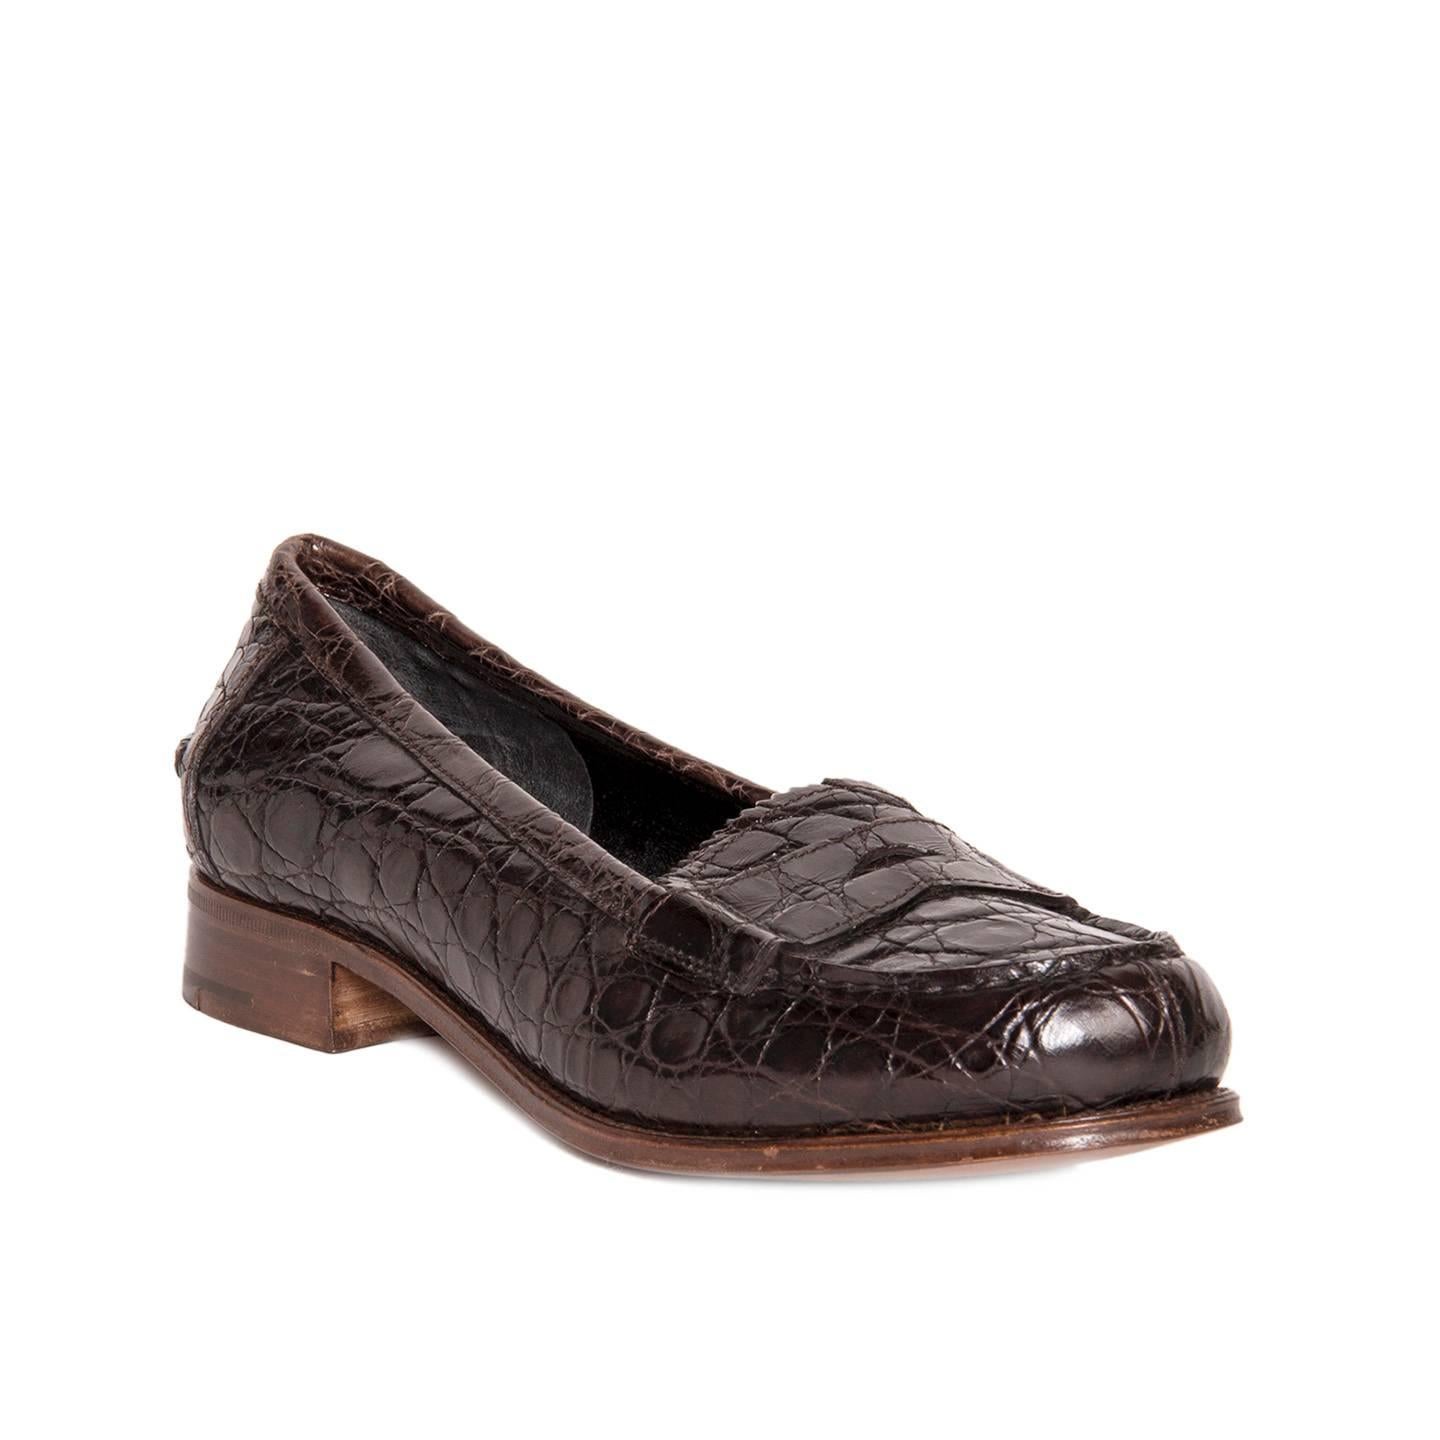 Brown crocodile penny loafers with wooden heel. Vero cuoio. Made in Italy.
Heel 1